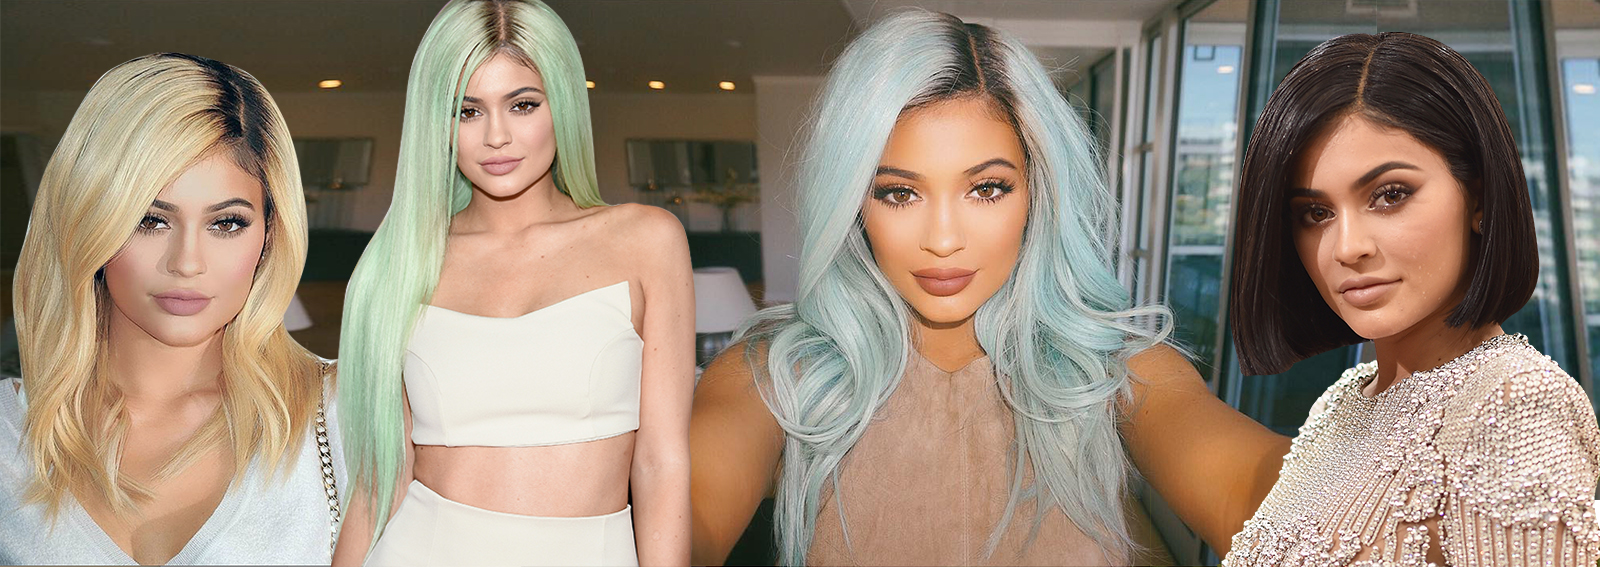 kylie jenner capelli mobile